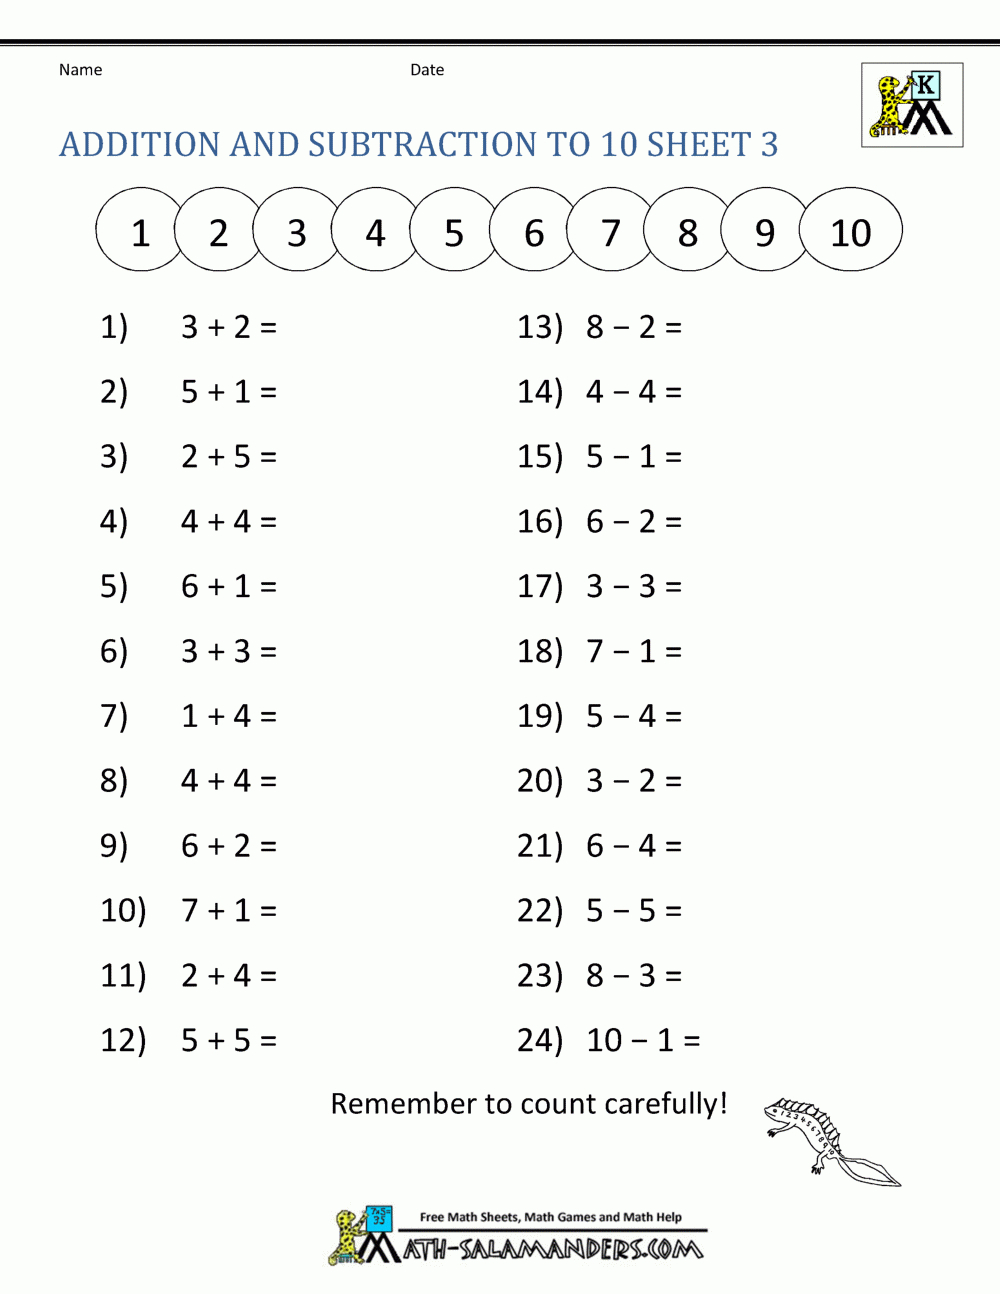 Addition And Subtraction Worksheets For Kindergarten - Free Printable Math Worksheets Addition And Subtraction